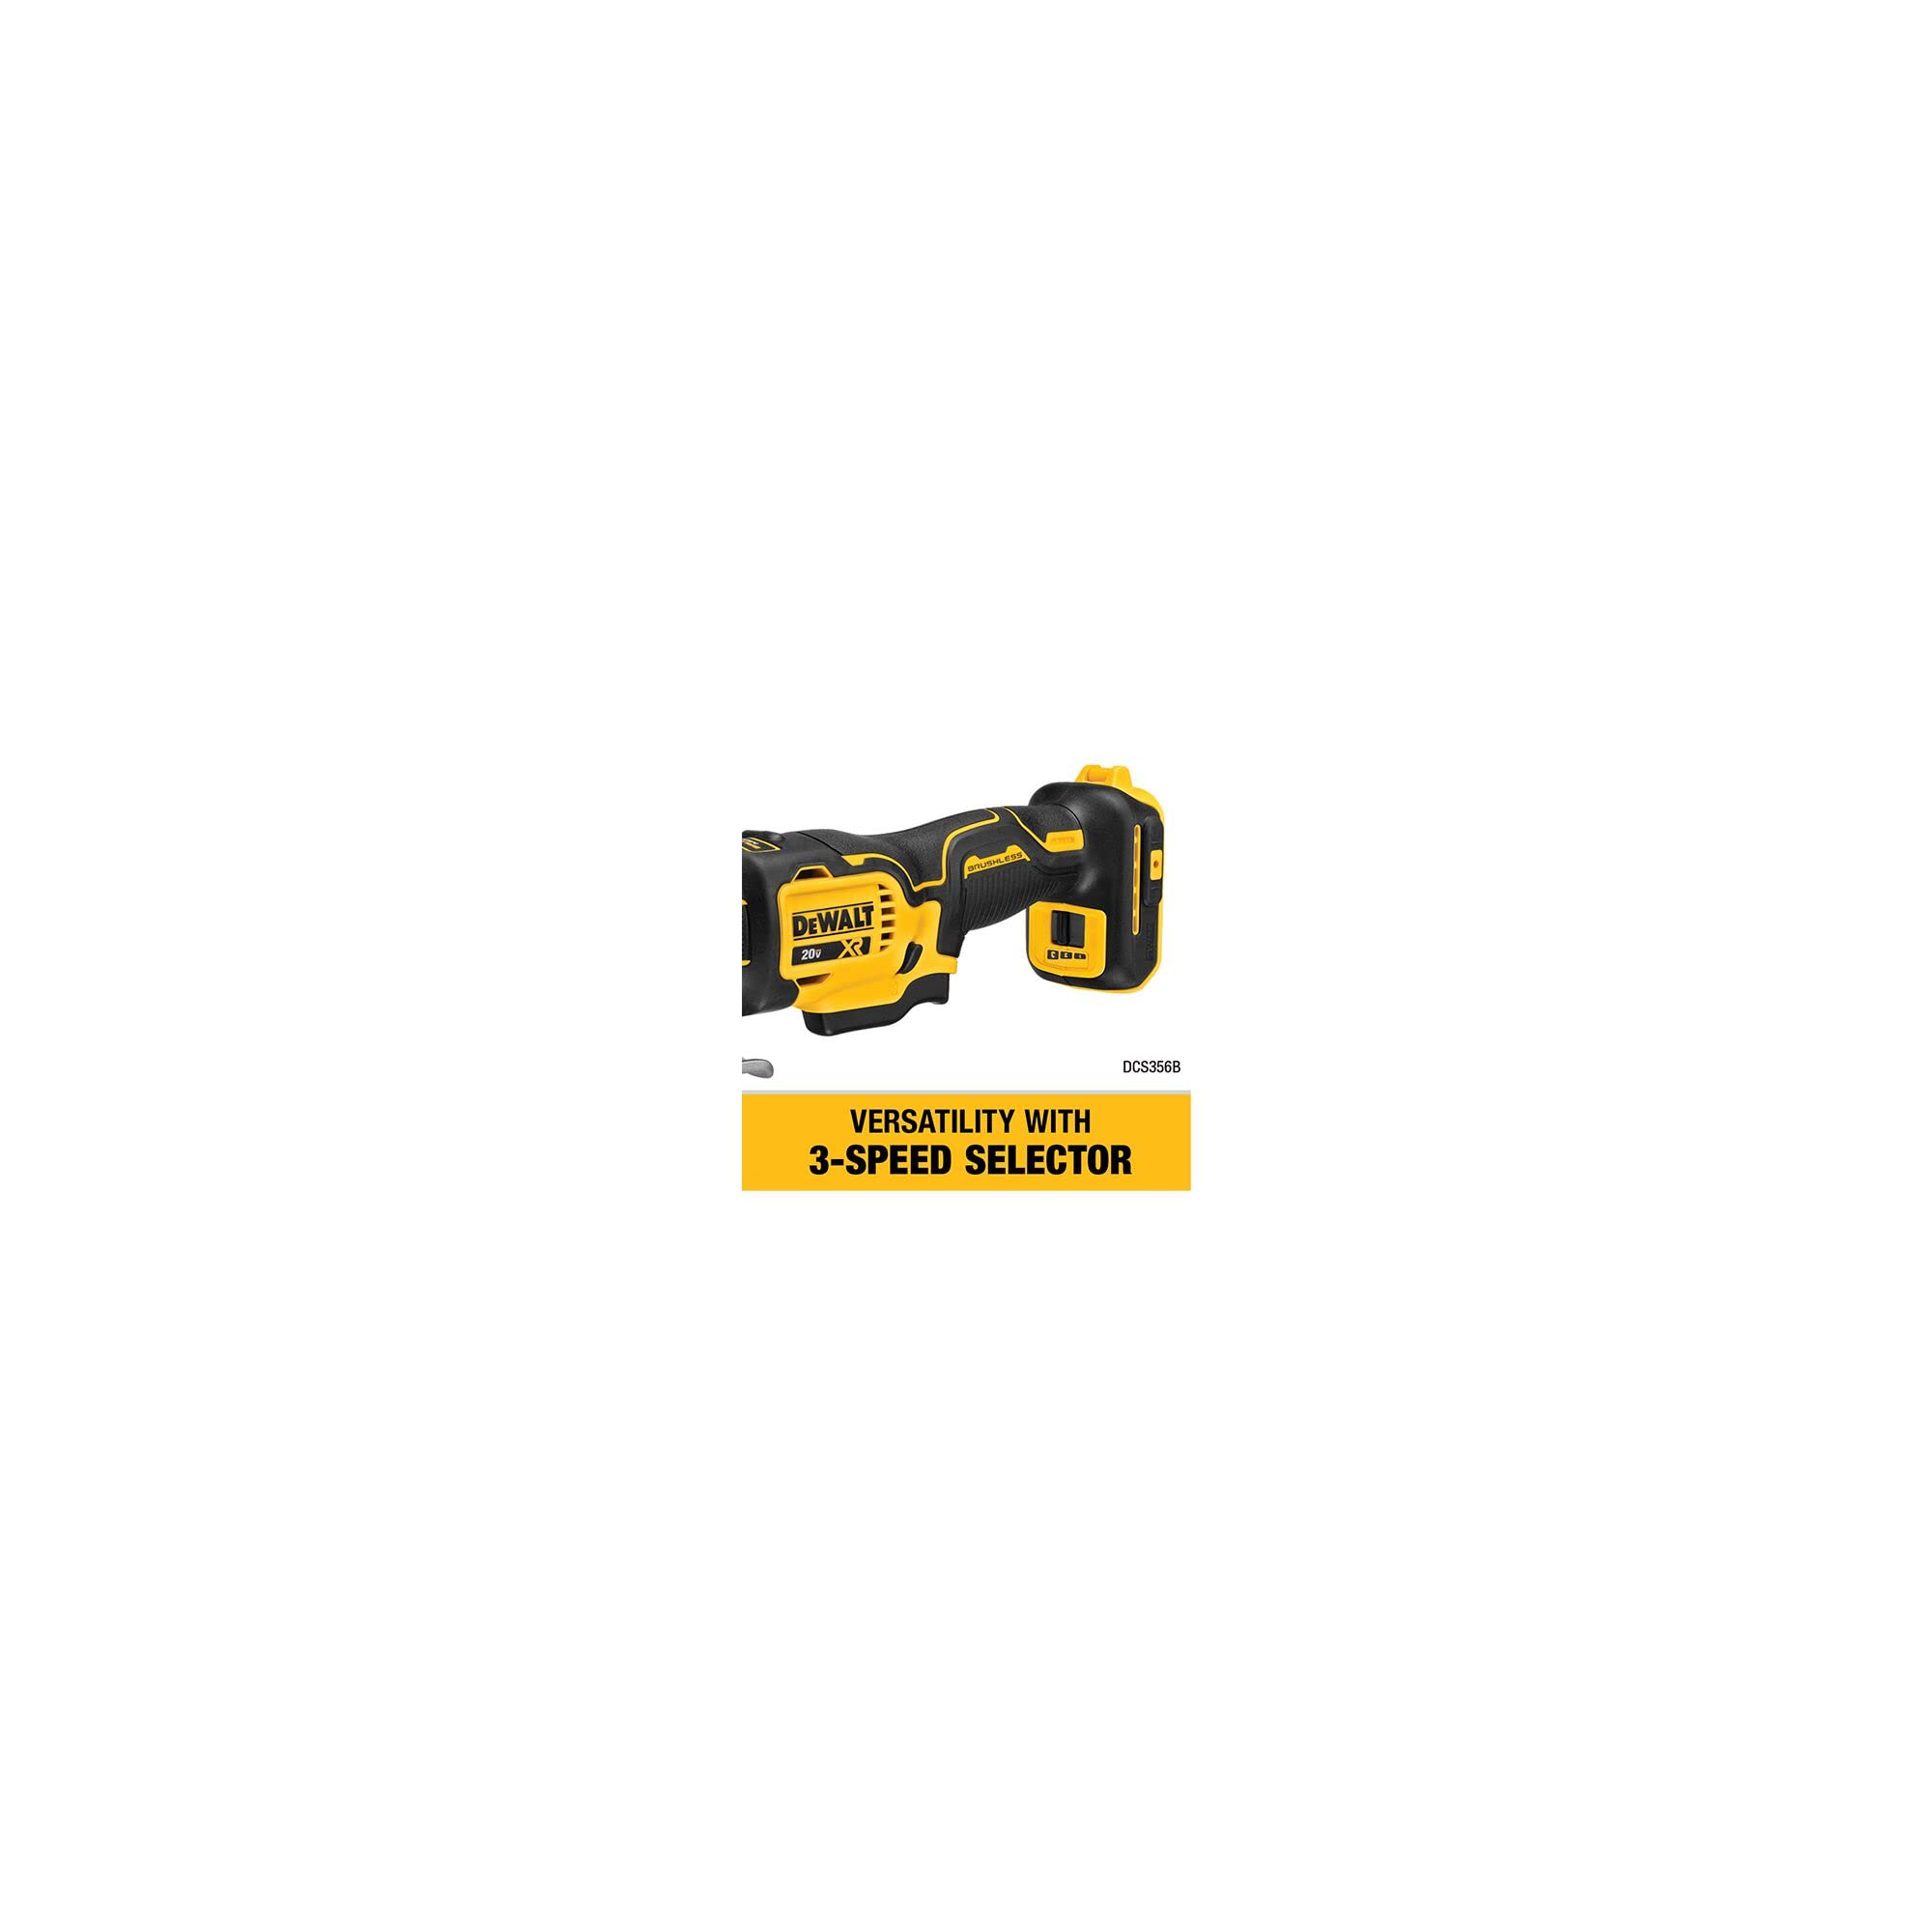 DEWALT 20V MAX Power Tool Combo Kit, 4-Tool Cordless Power Tool Set with Battery and Charger (DCK551D1M1)